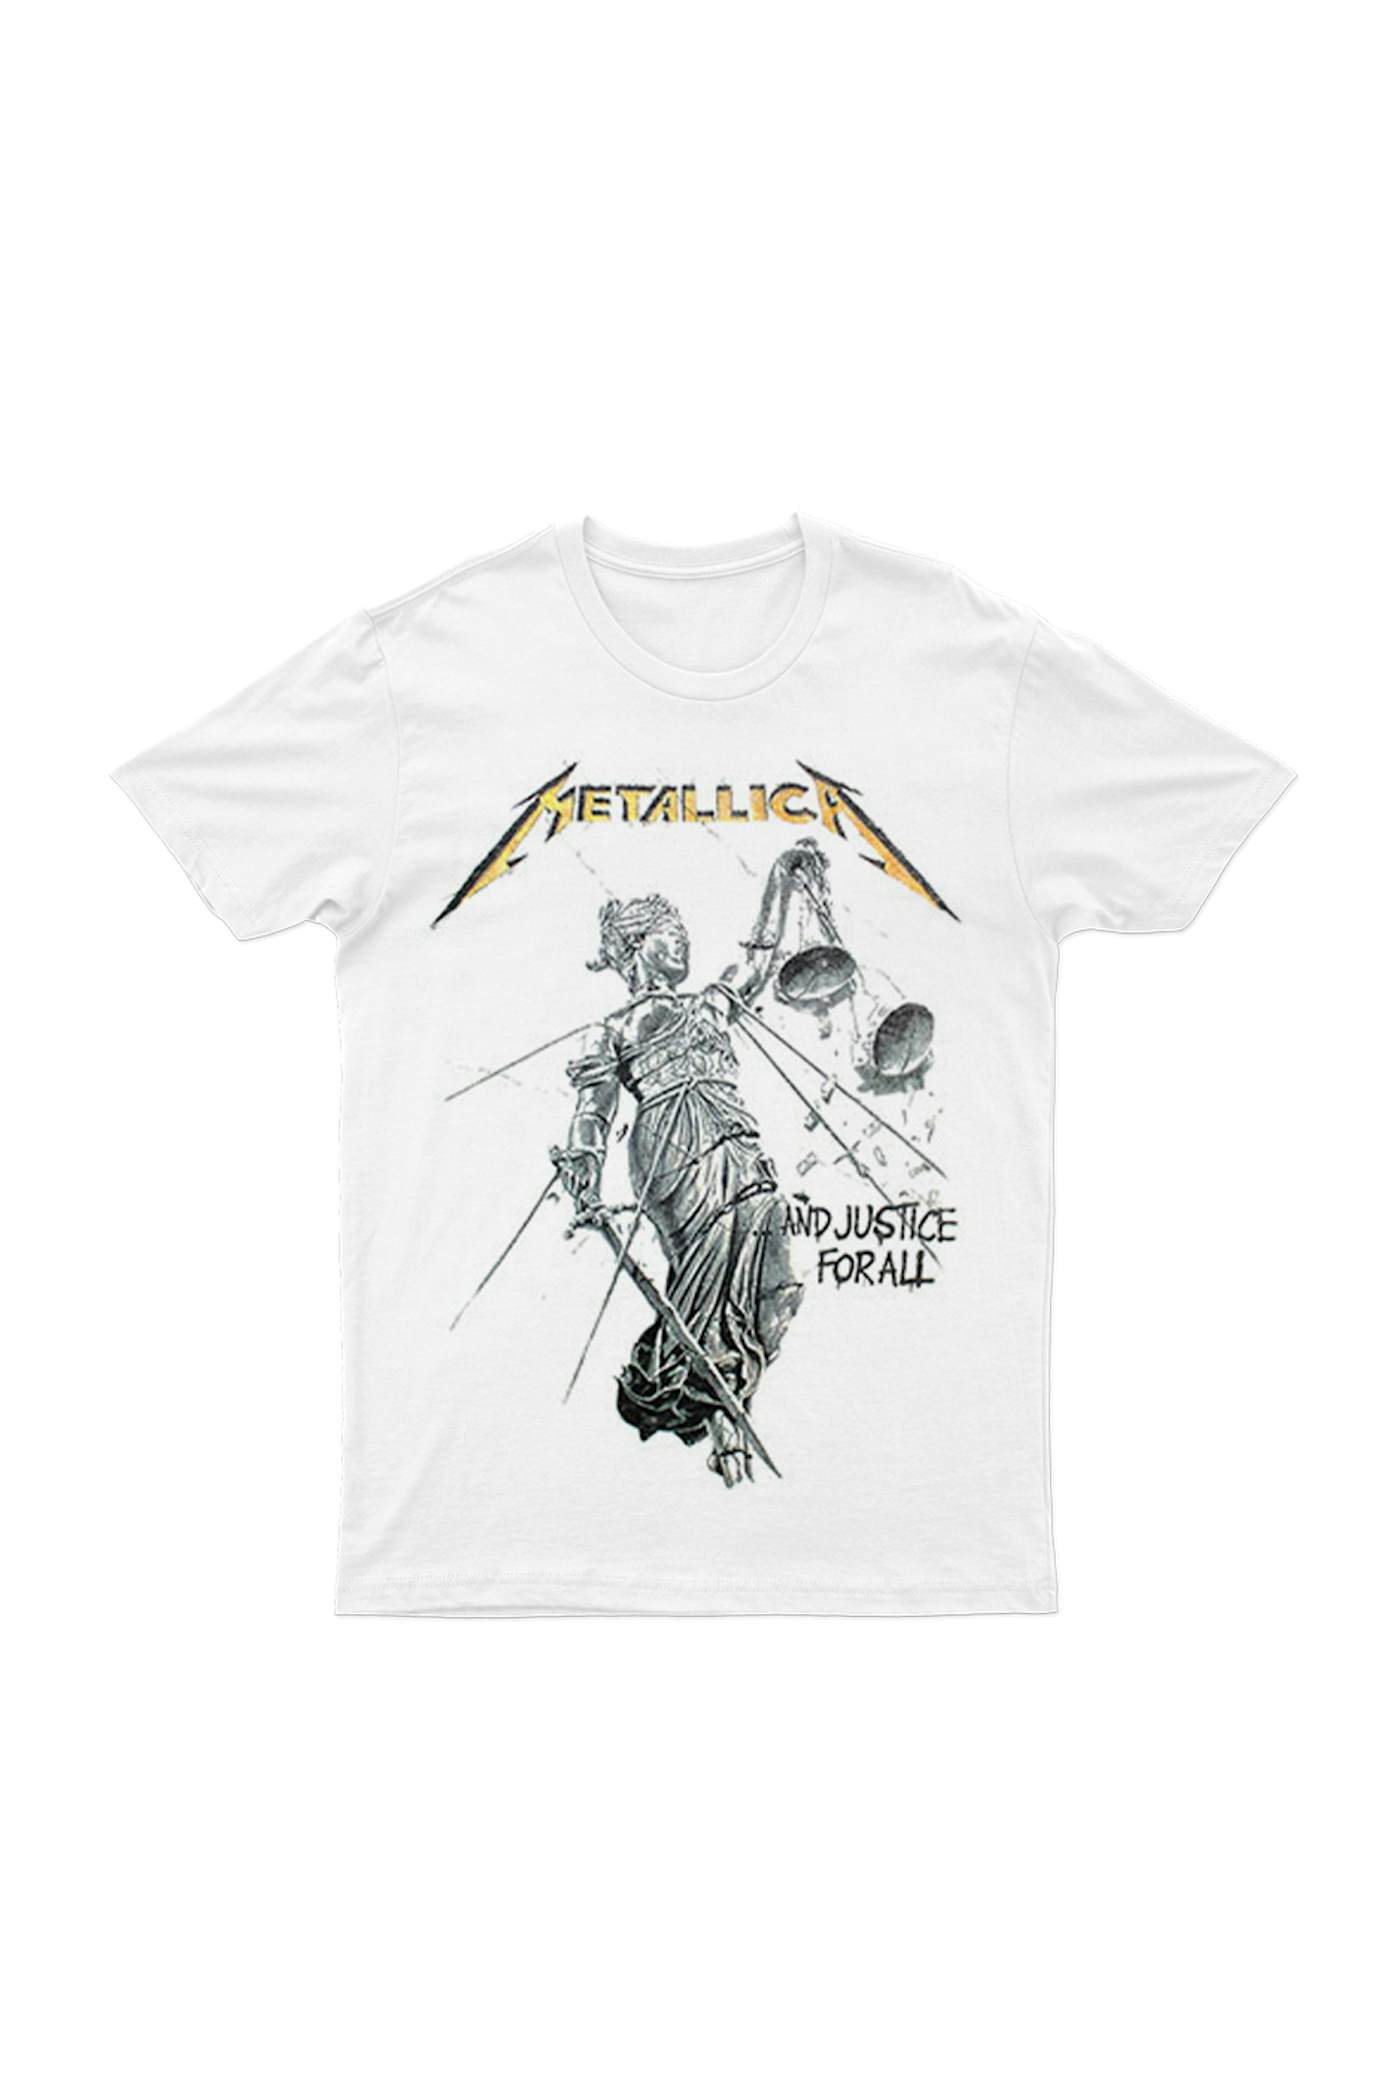 Metallica Ride the Lightning Official White T-Shirt New All Size Thrash  Metal